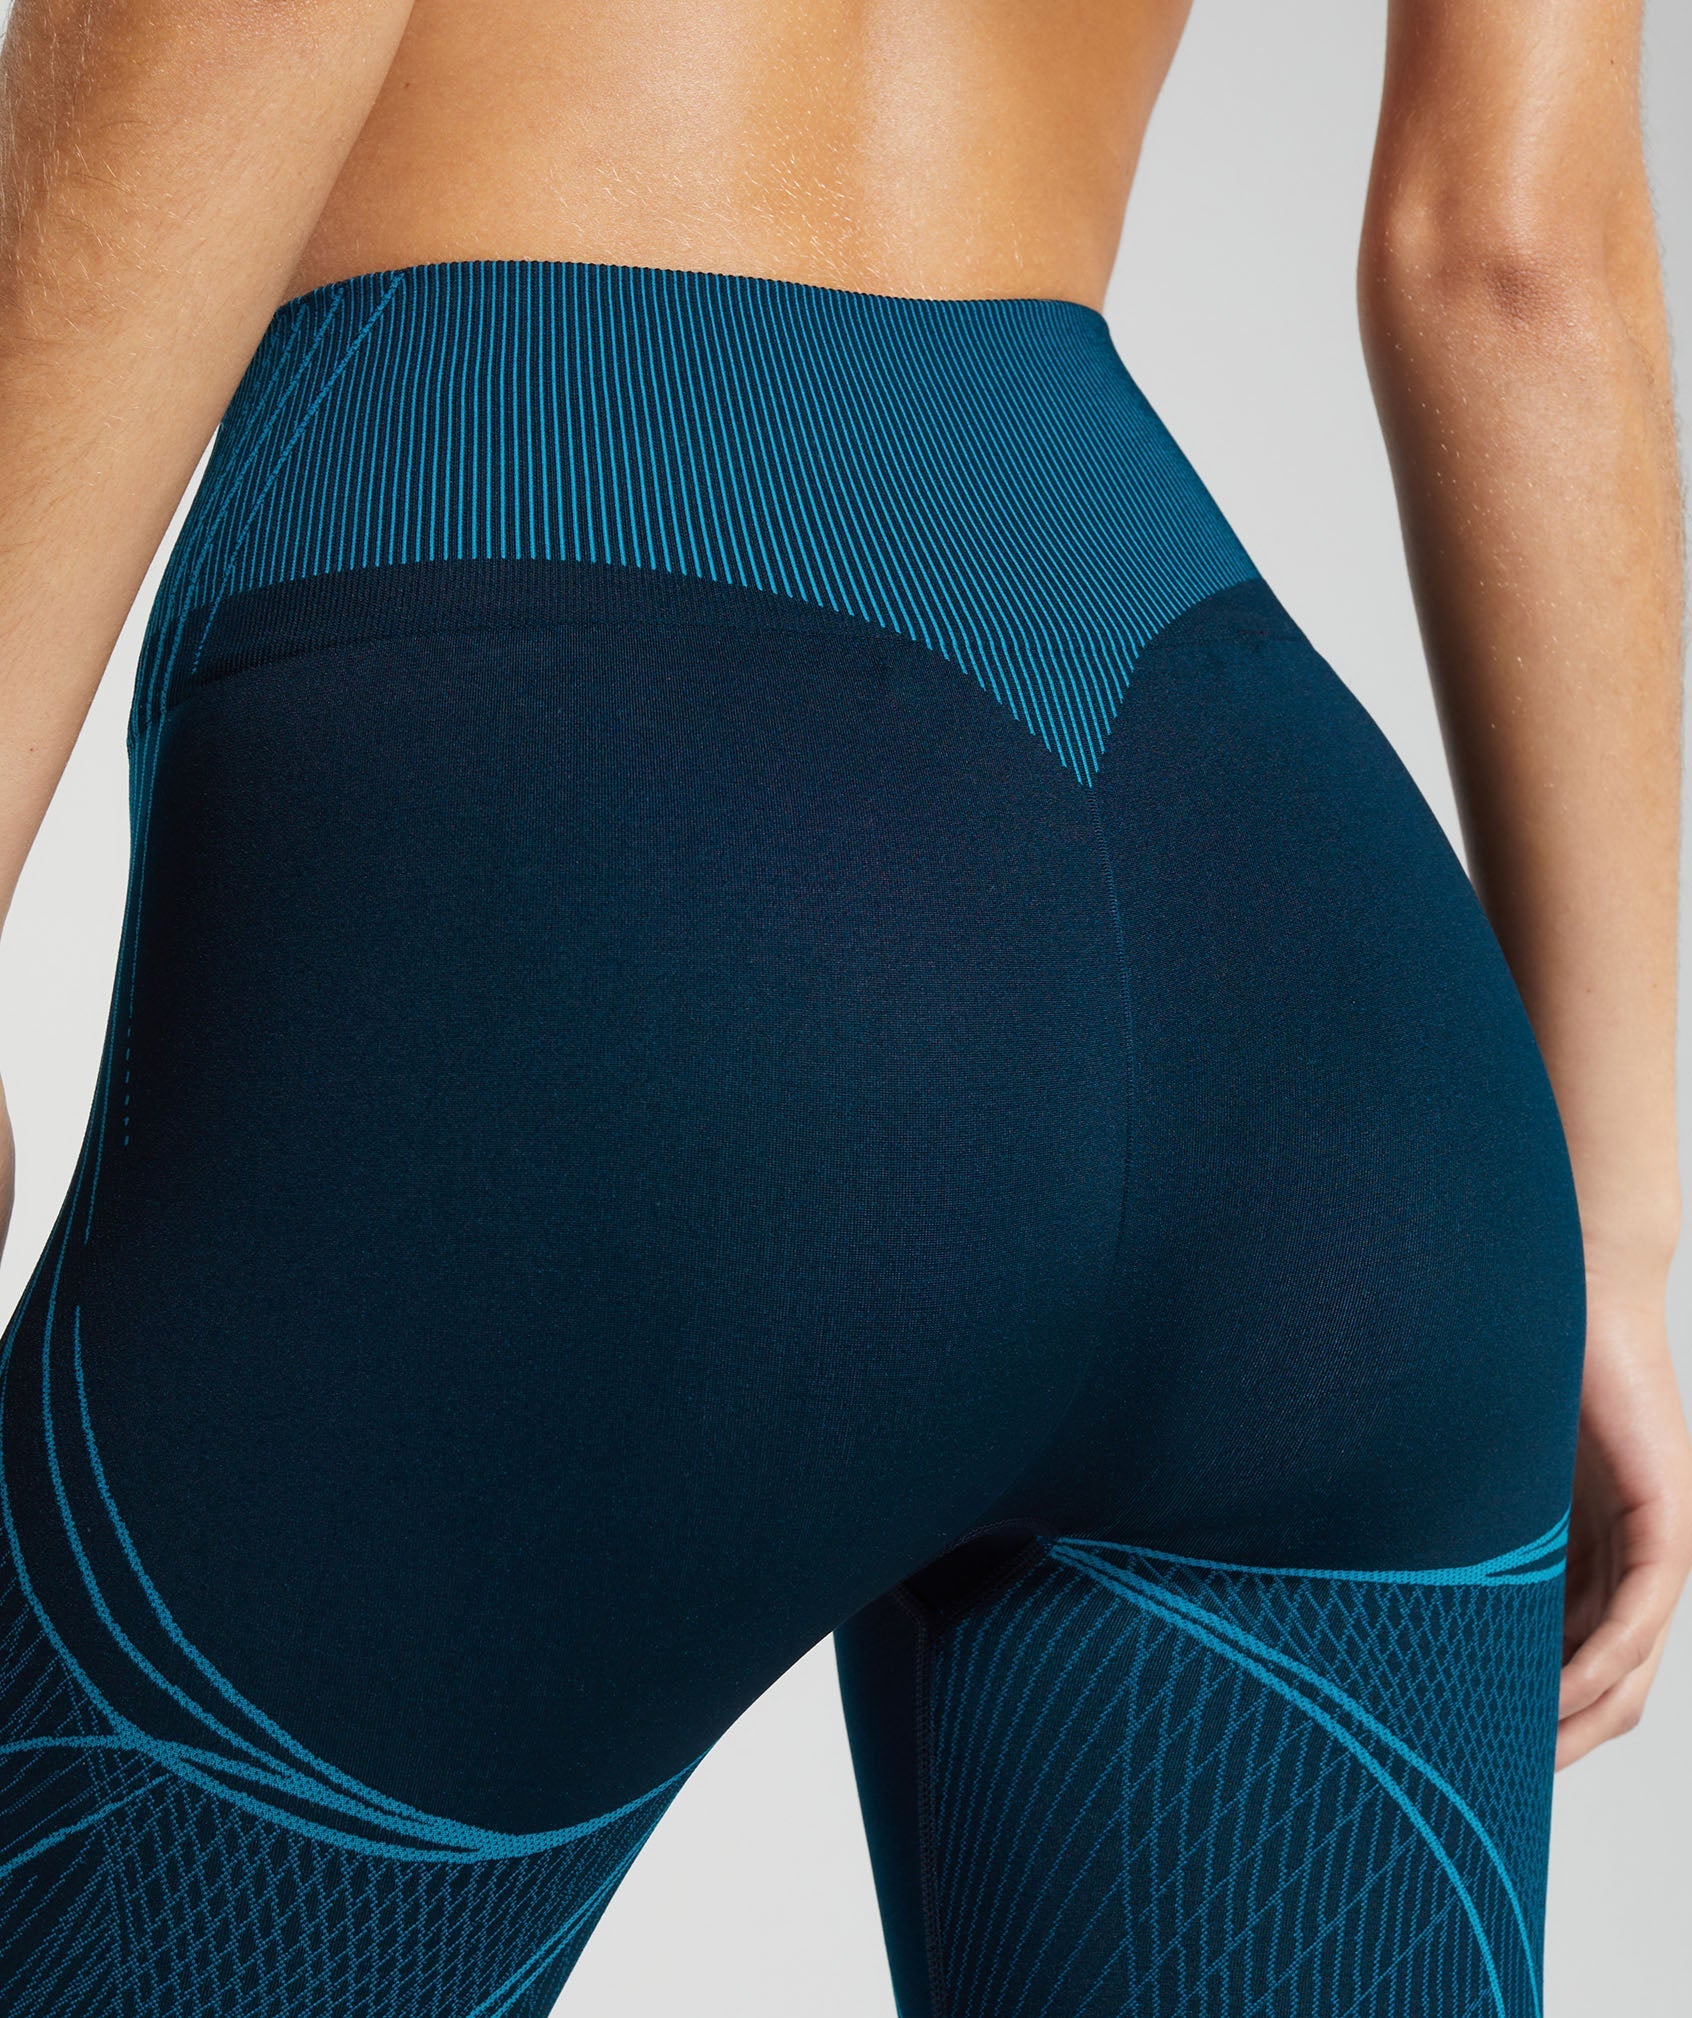 GS x Analis Leggings in Midnight Blue/Lats Blue - view 7